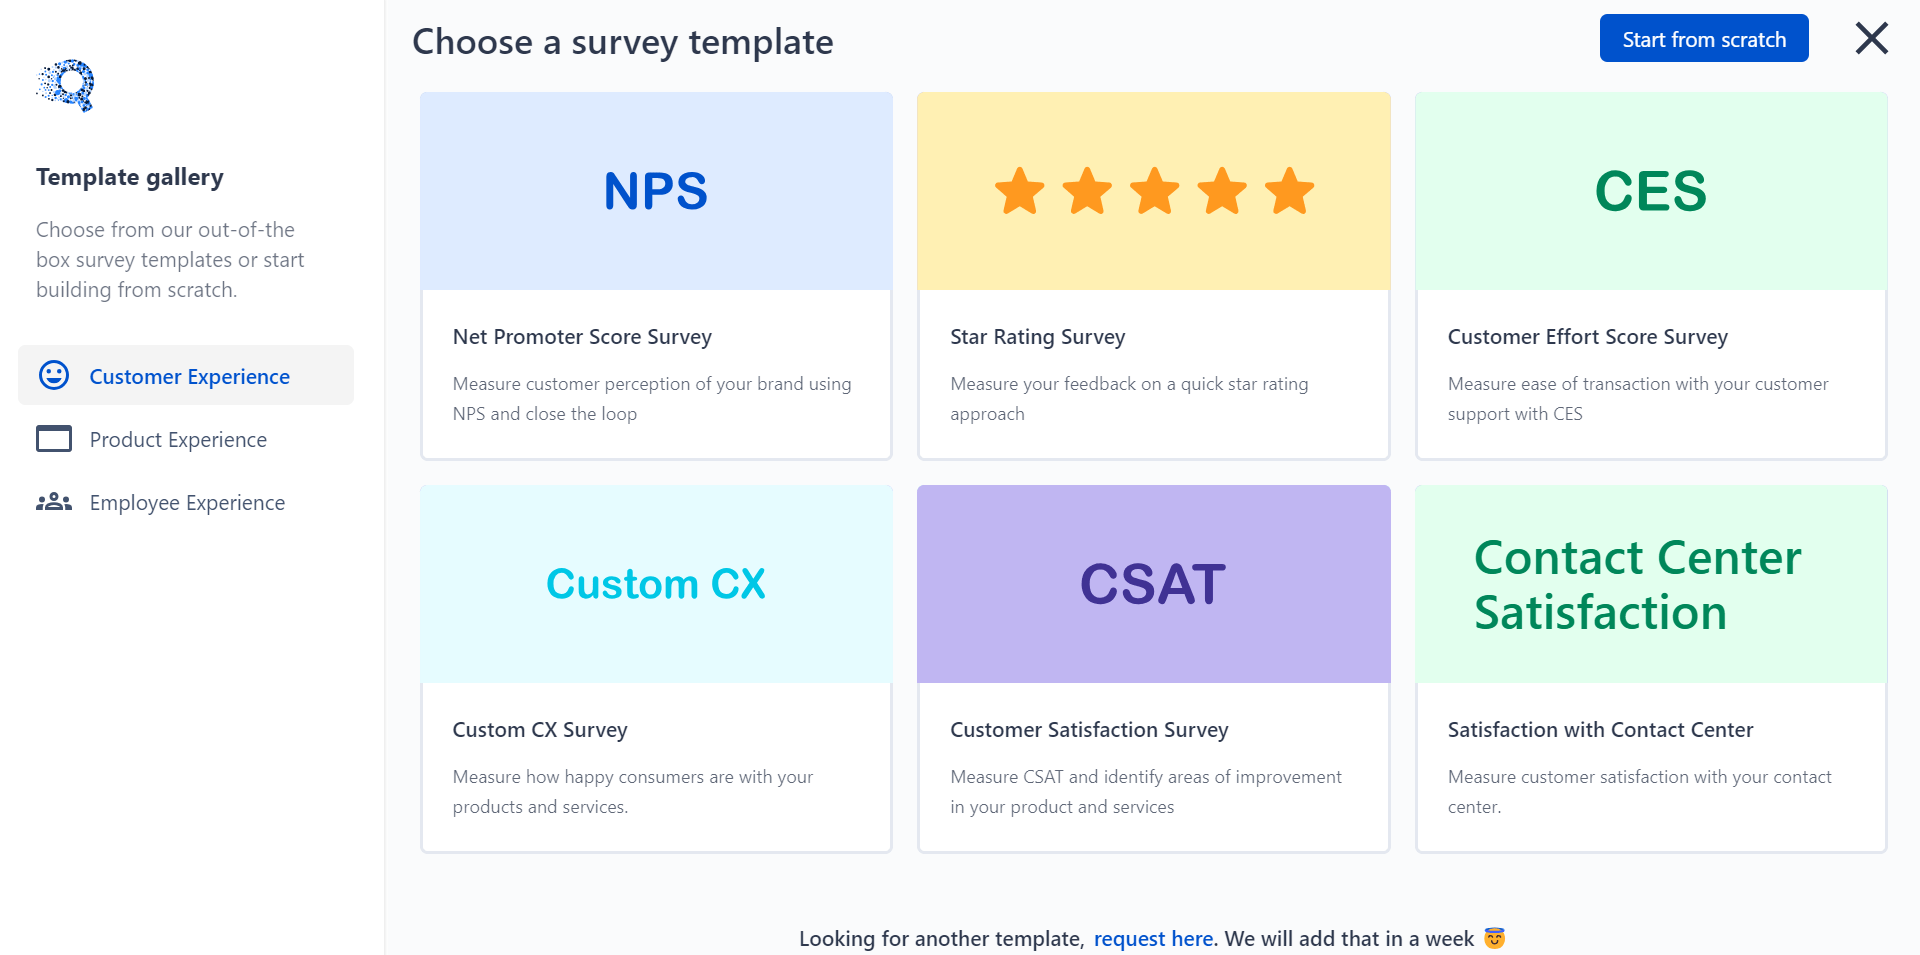  The image shows the different industry-specific survey templates of SurveySensum. 